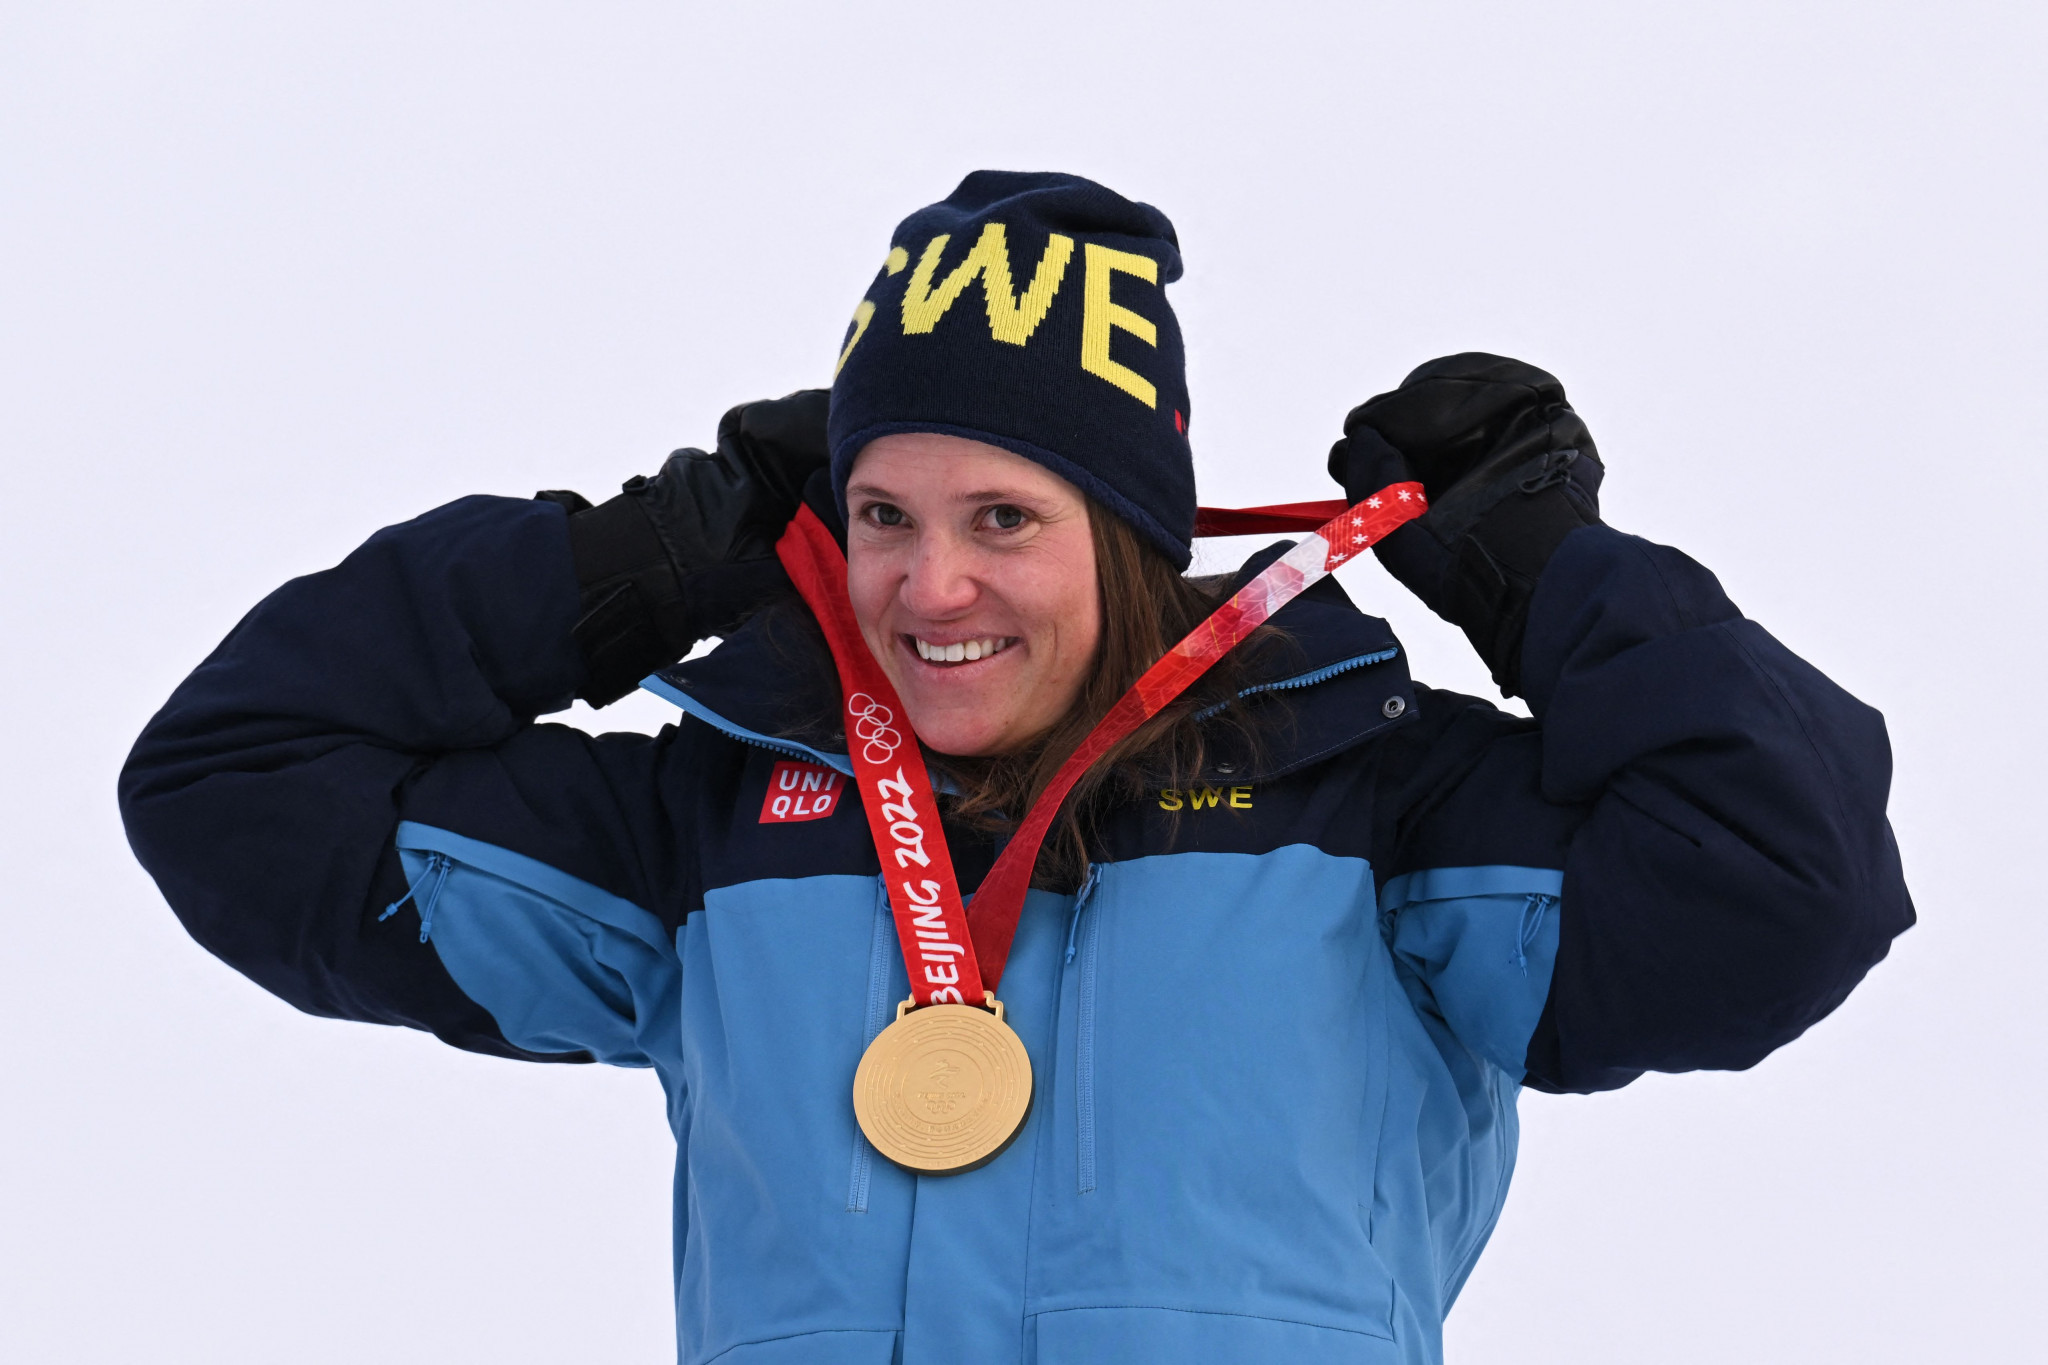 Hector claims Olympic giant slalom gold as dream Alpine skiing season continues